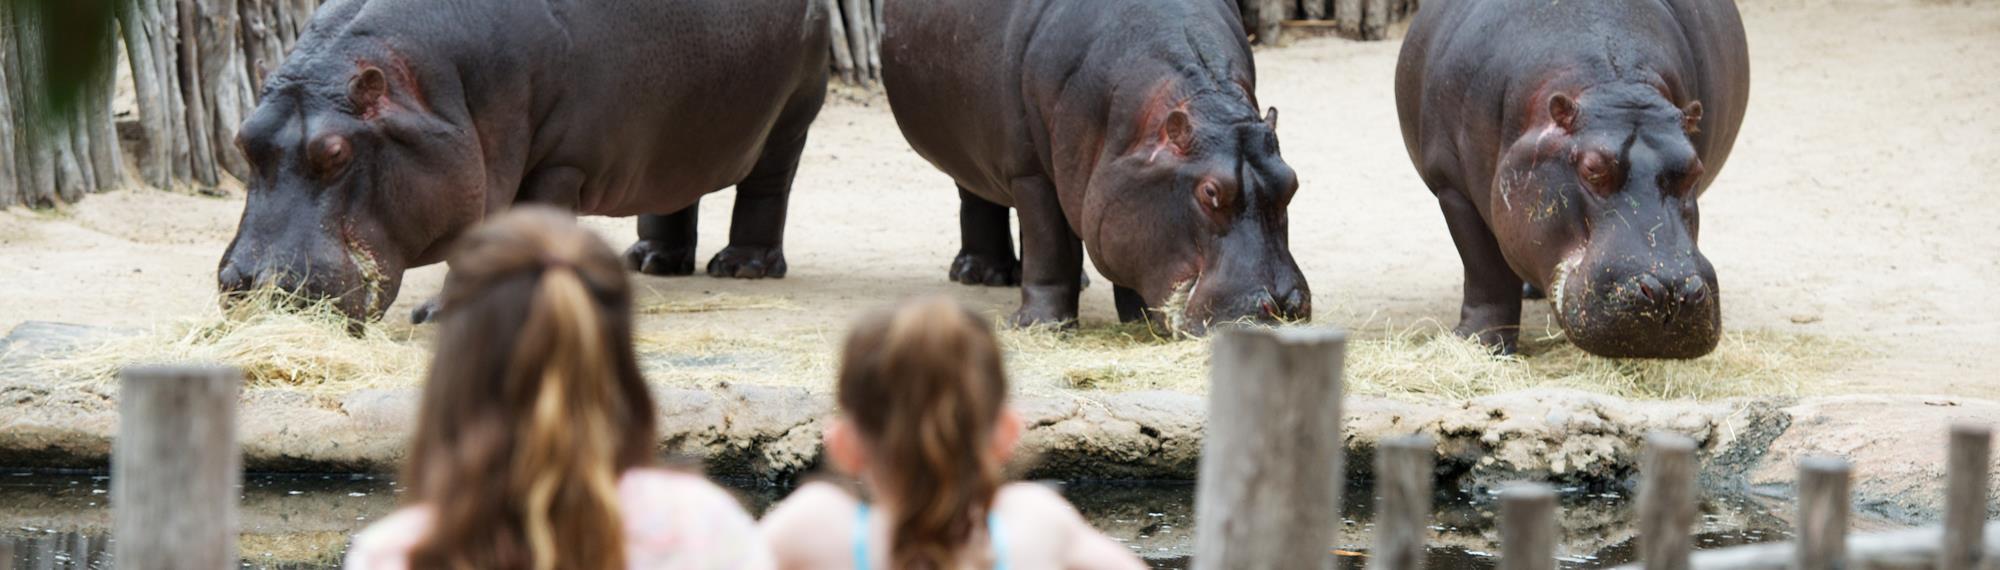 Two young guests watch three Hippopotamuses eating.